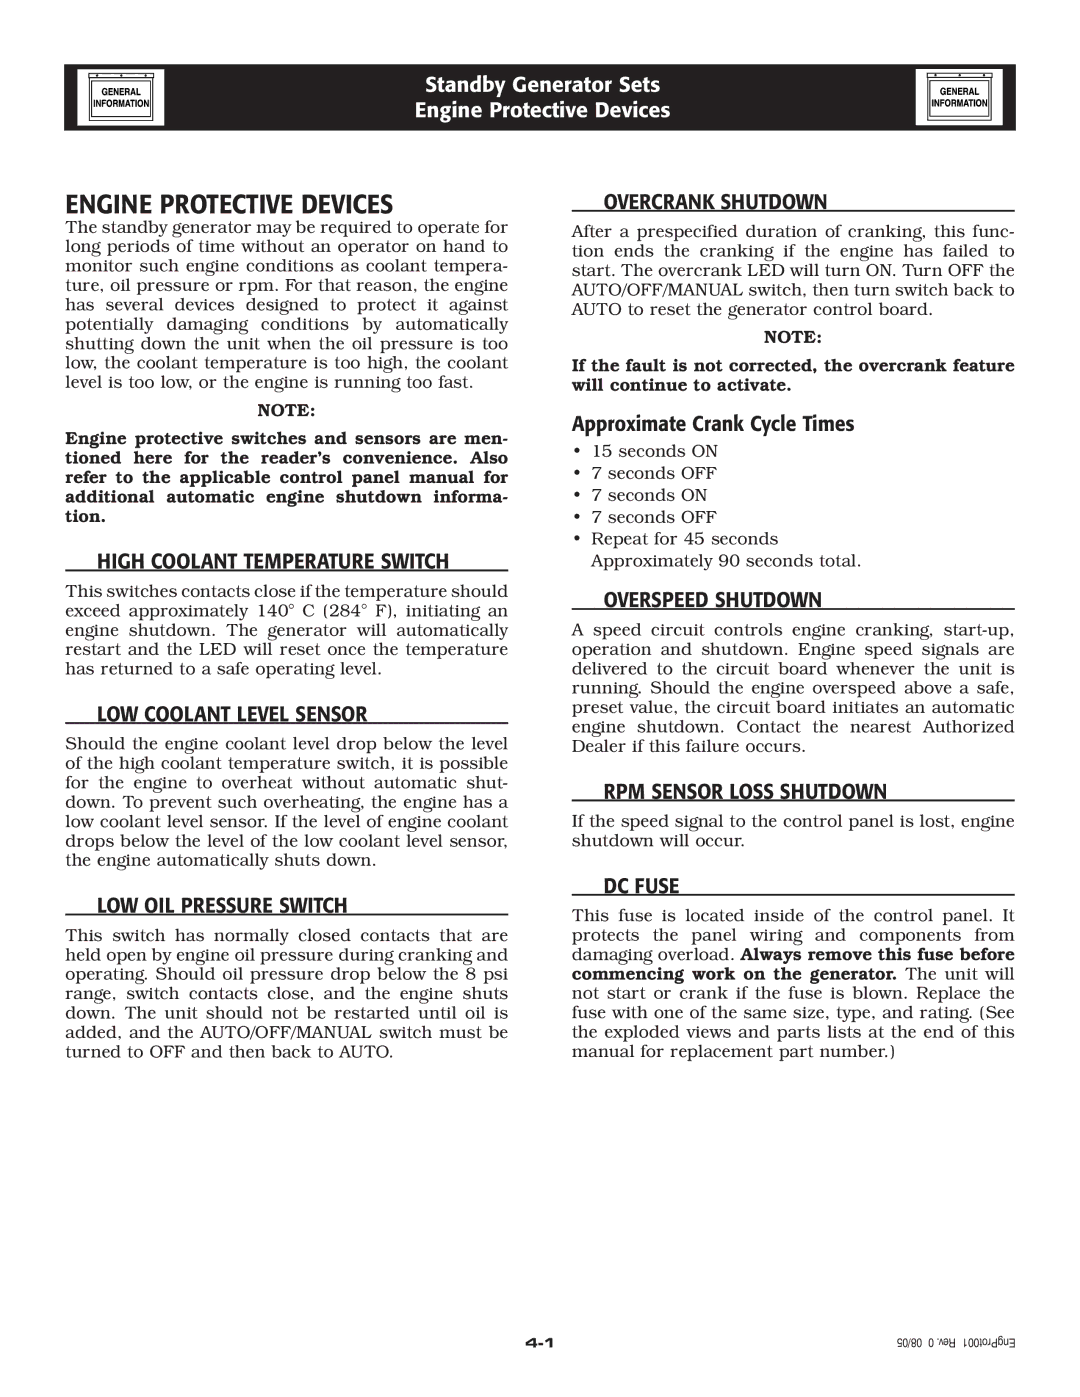 Generac Power Systems 005221-0 owner manual Engine Protective Devices 